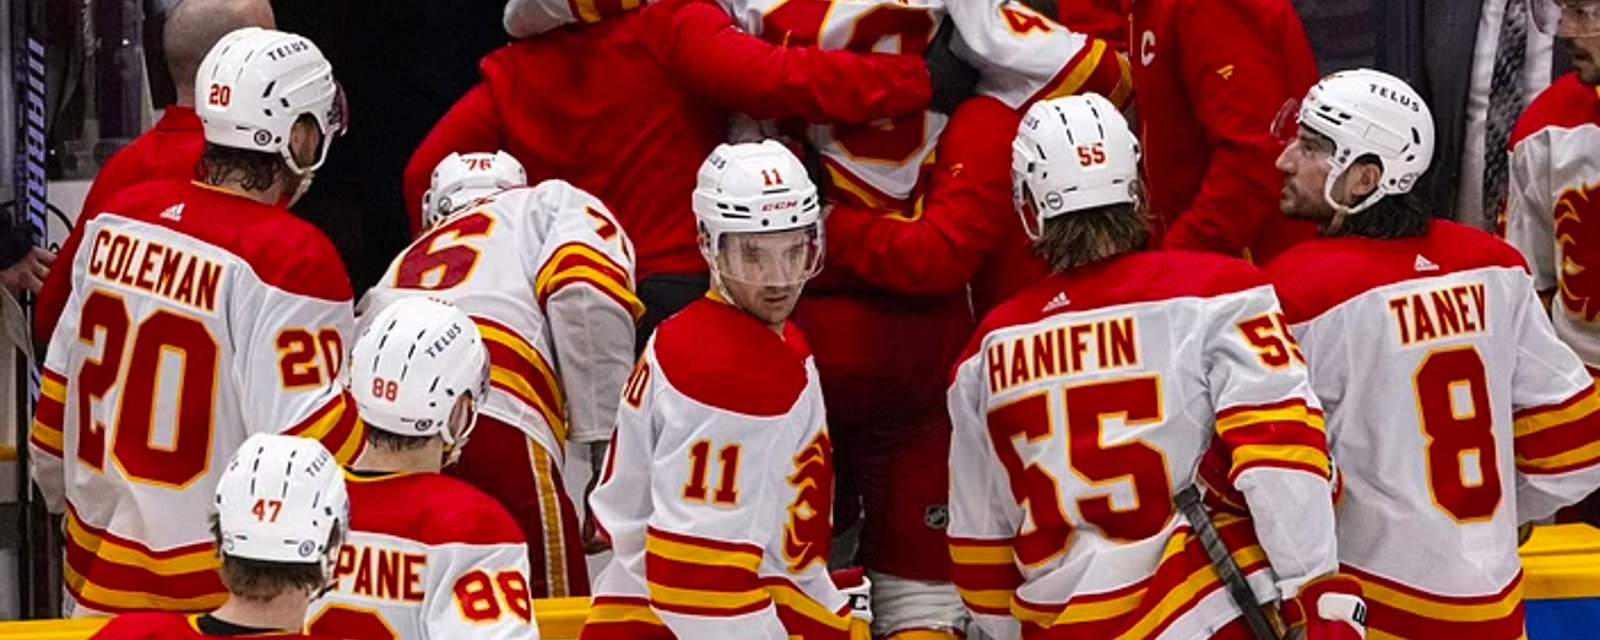 Flames GM Craig Conroy worries about his players amidst intense trade chatter